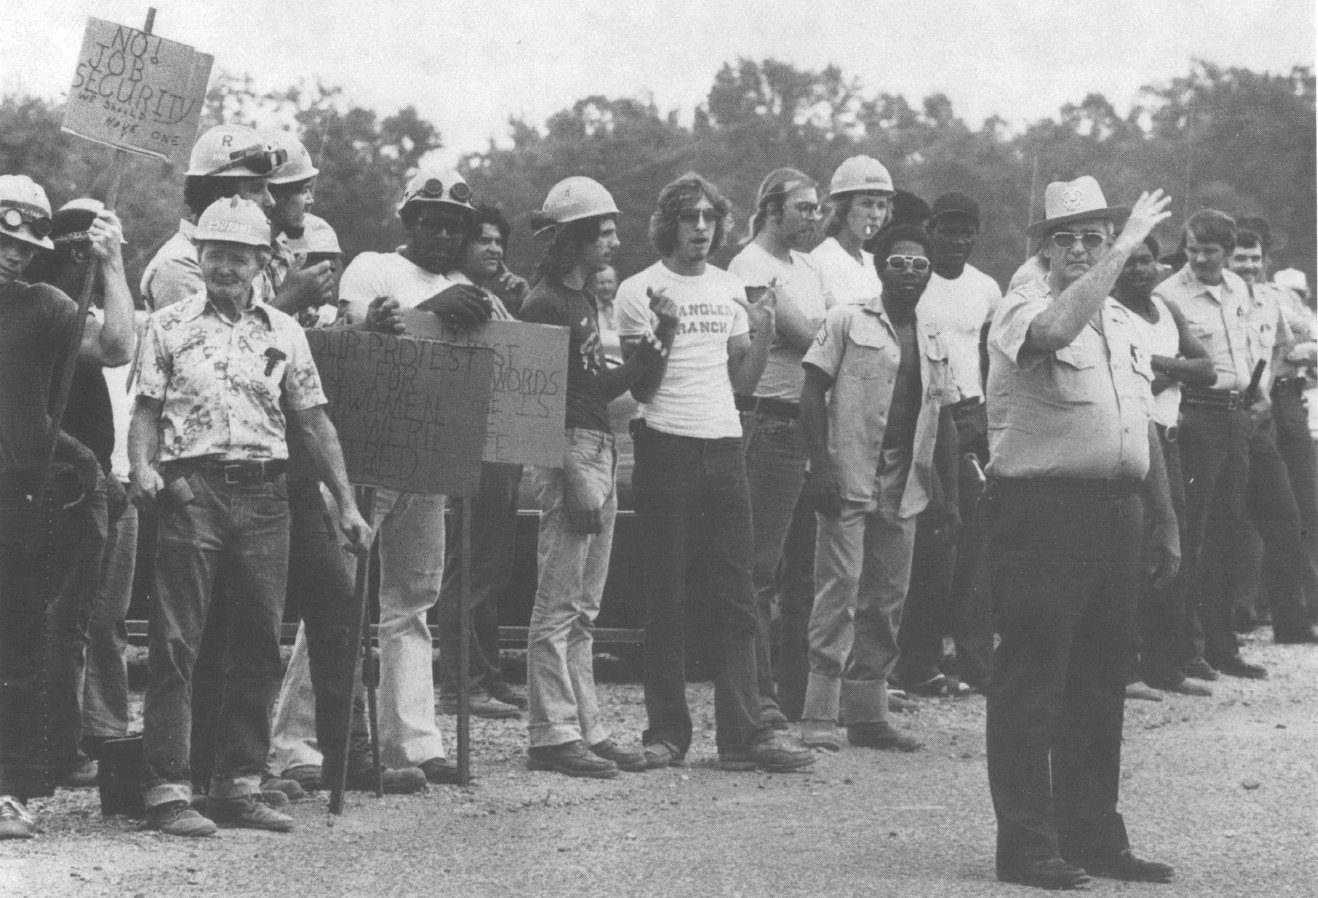 Black and white photo of group of picketers standing behind a uniformed man